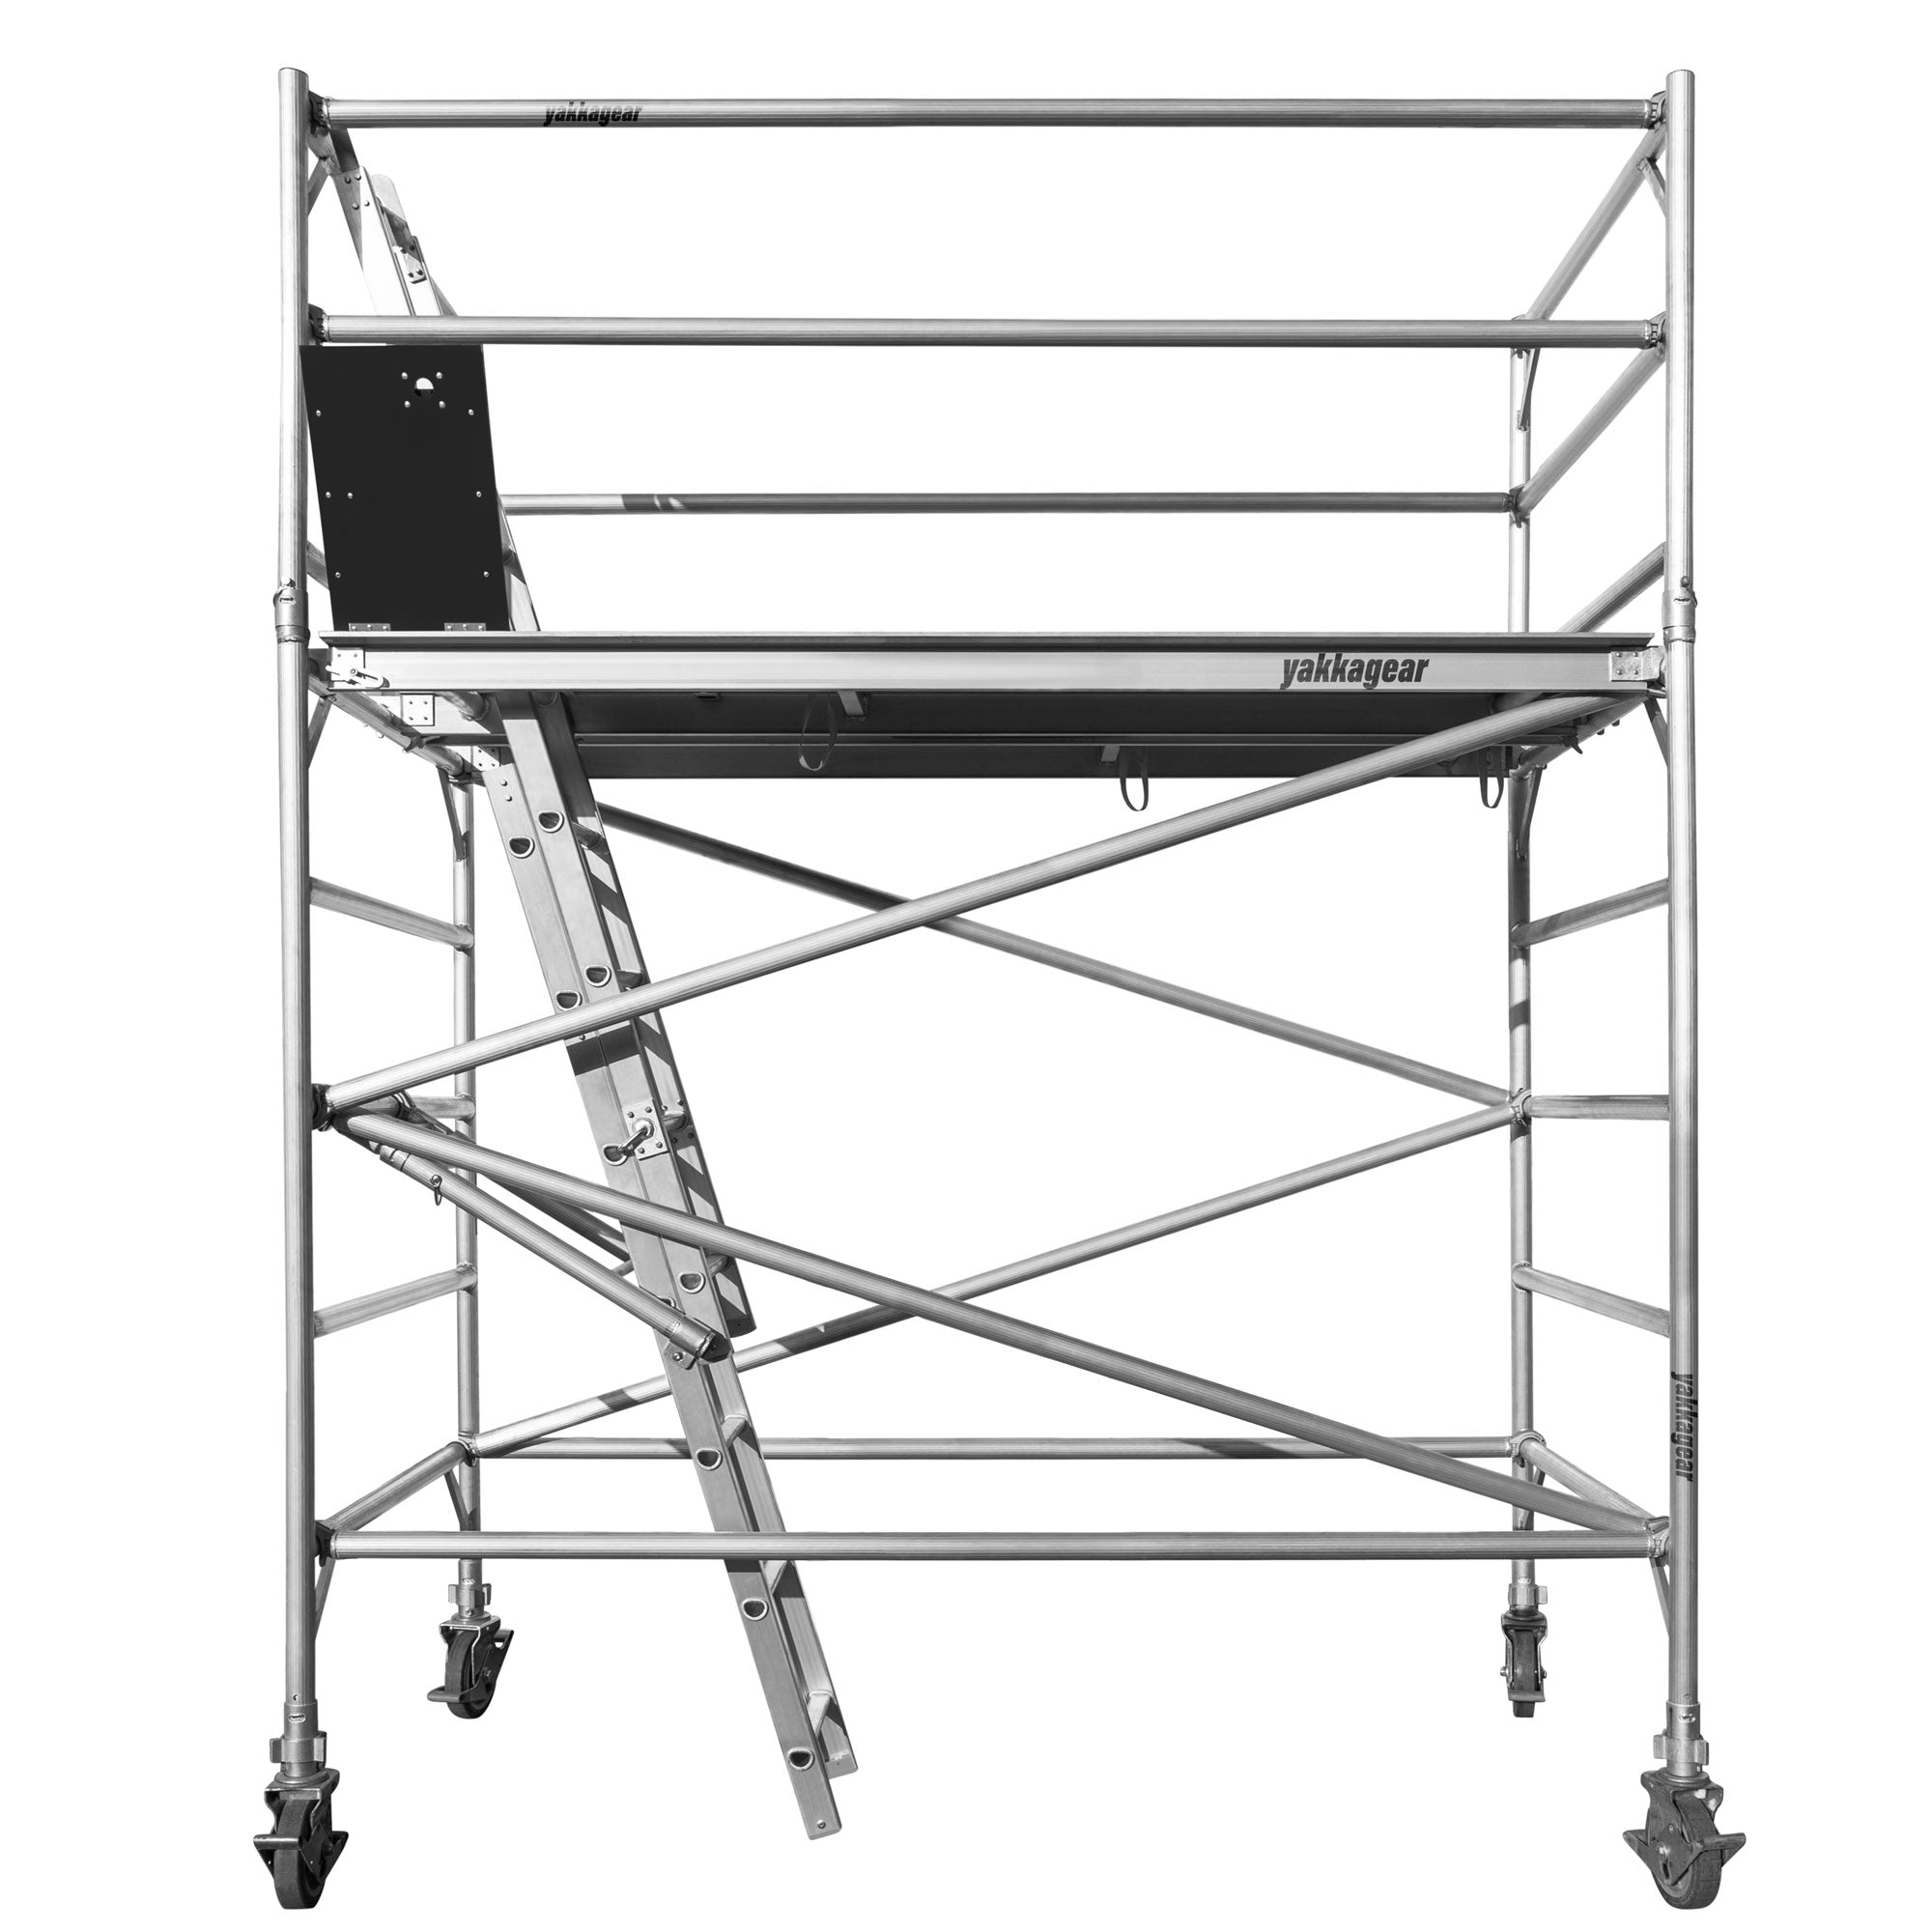 Yakka Gear Australia 2.5m Length 1.3m Wide 4.6m reach wide scaffolding tower access equipment with working height of 2.6m, view from the front, white background.